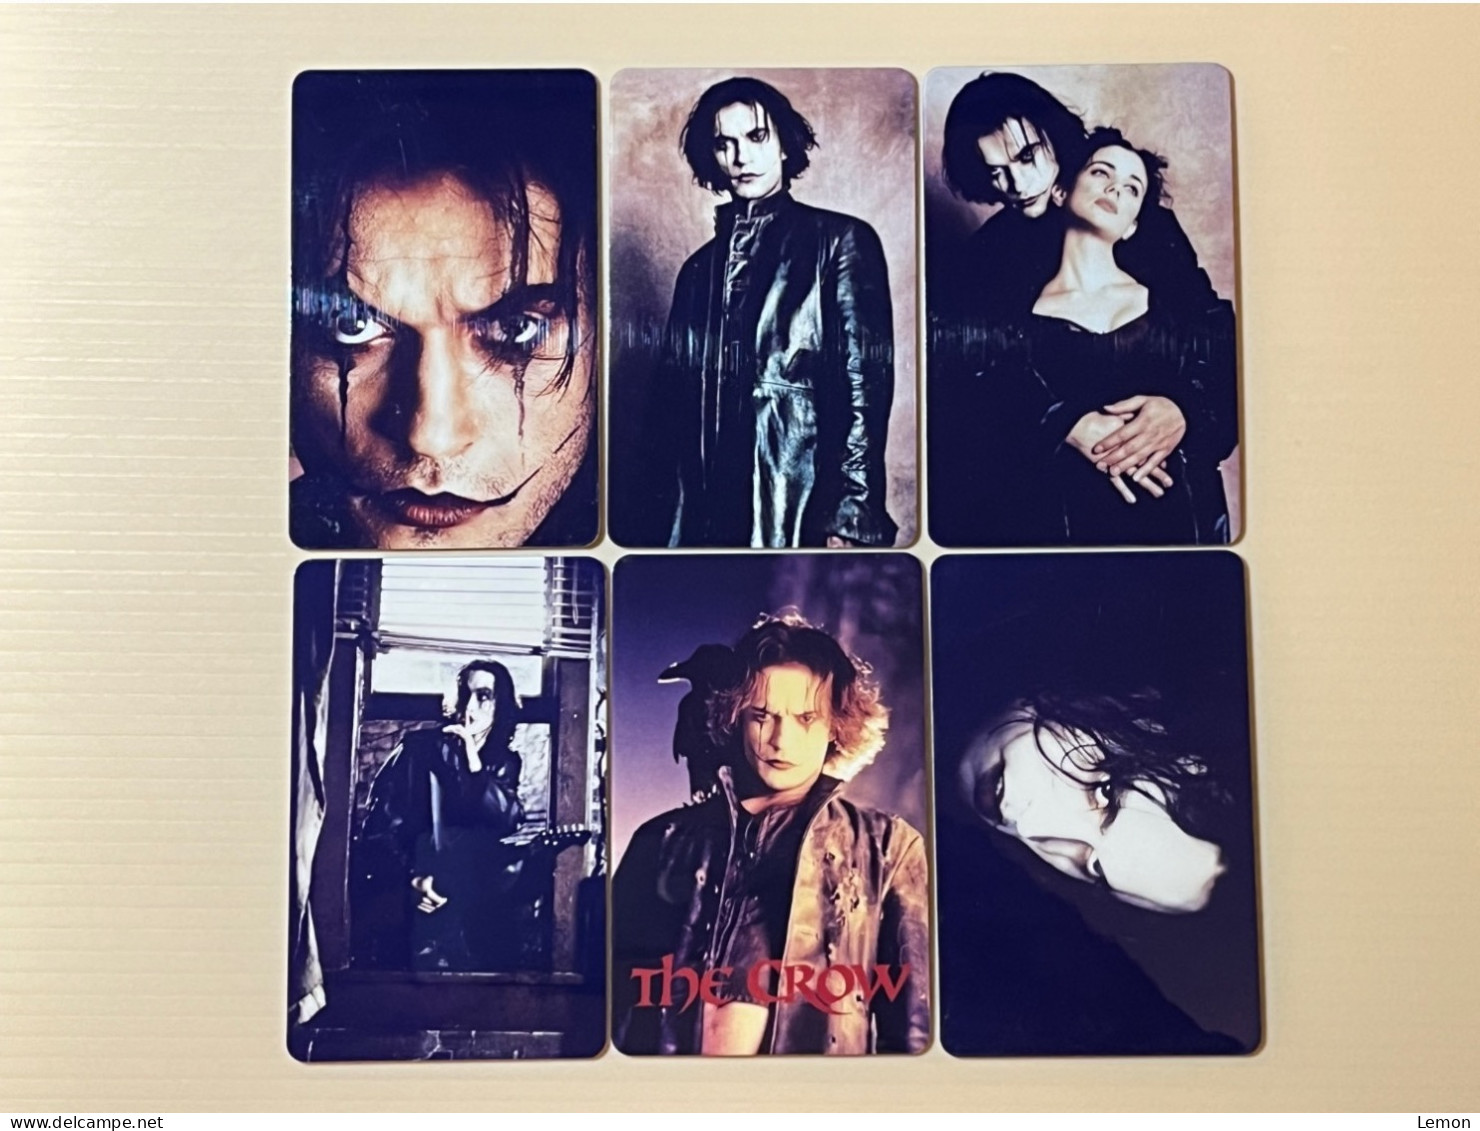 Mint USA UNITED STATES America Prepaid Telecard Phonecard, The Crow, Set Of 5 Mint Cards & 1 Used Card - Collections